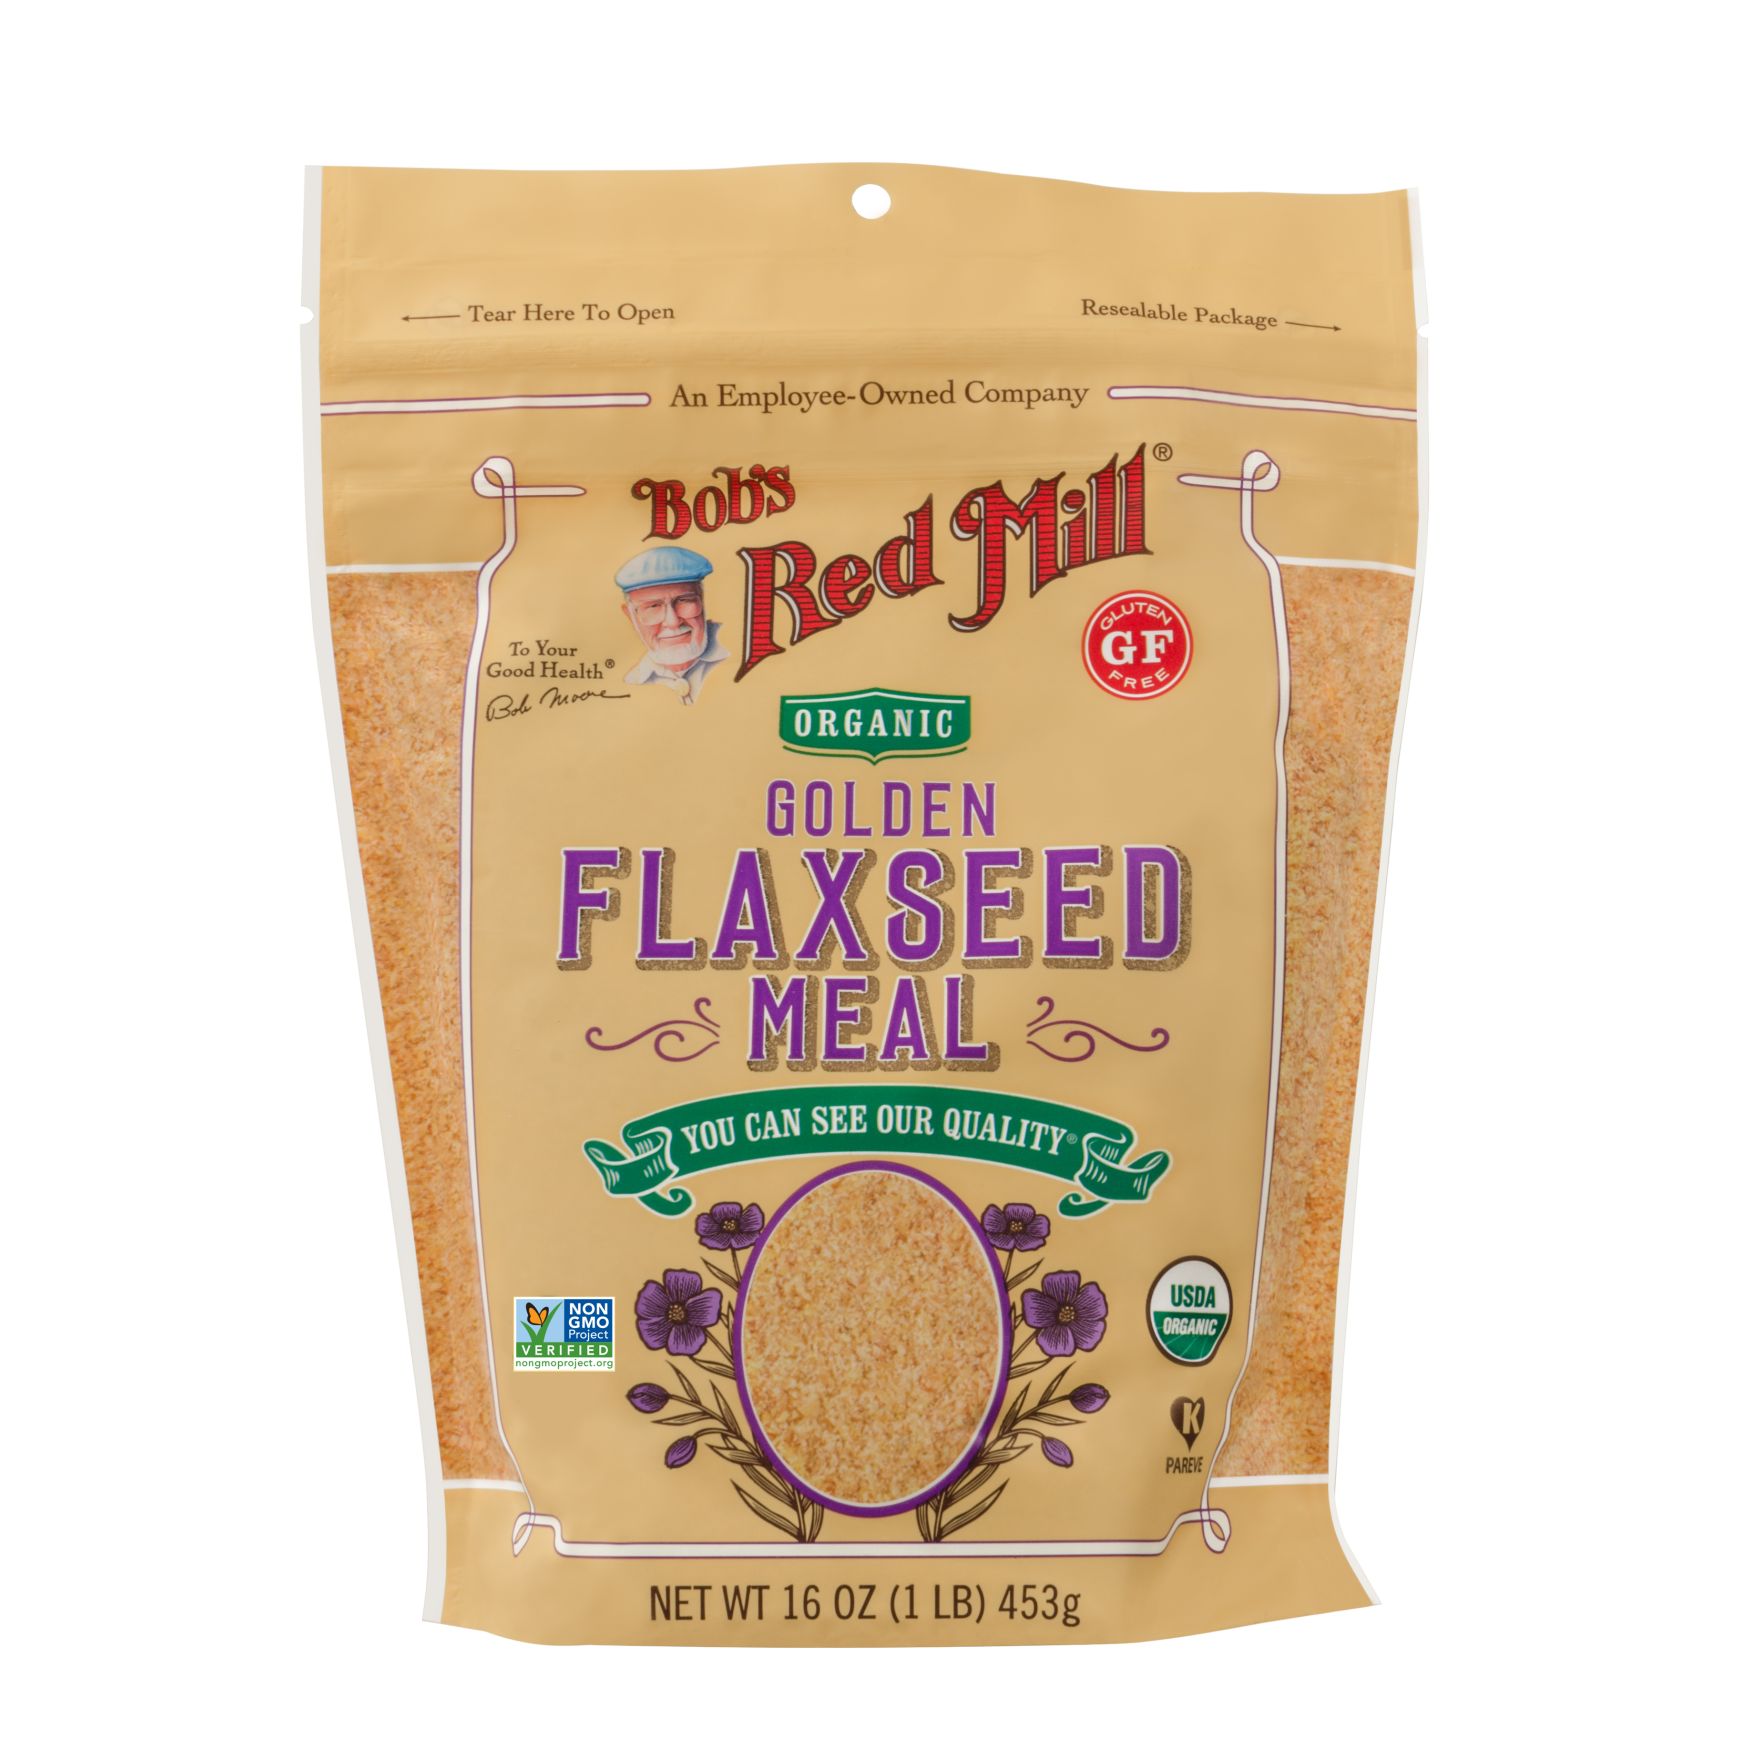 Organic Golden Flaxseed Meal | Bob's Red